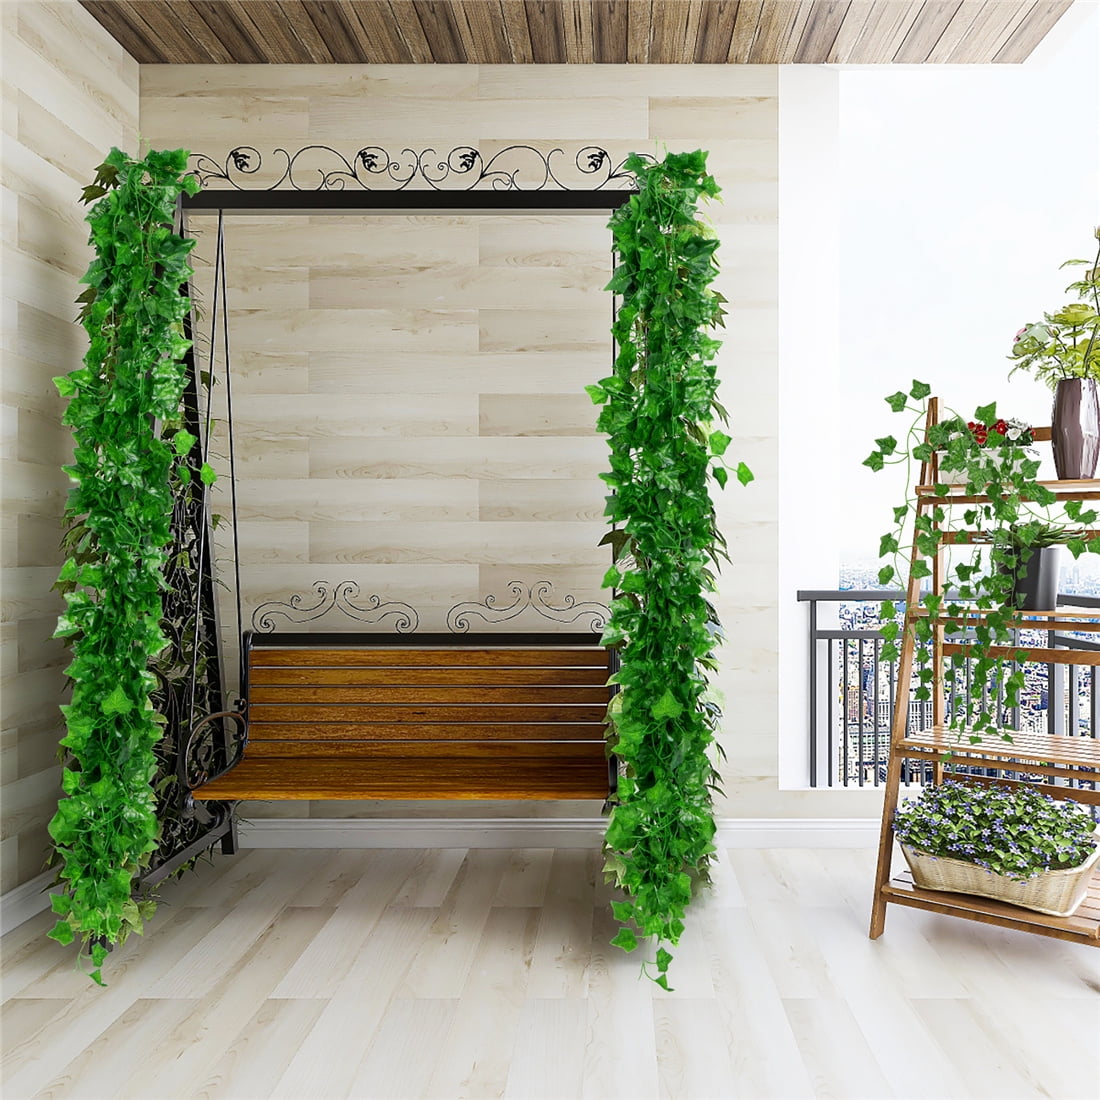 Bulk Faux Greenery Aesthetic Room Decor Artificial Plants LED Ivy Garland  Fake Leaf Vines Hanging For Home Living Decoration Bedroom 221122 From  Cong08, $12.68